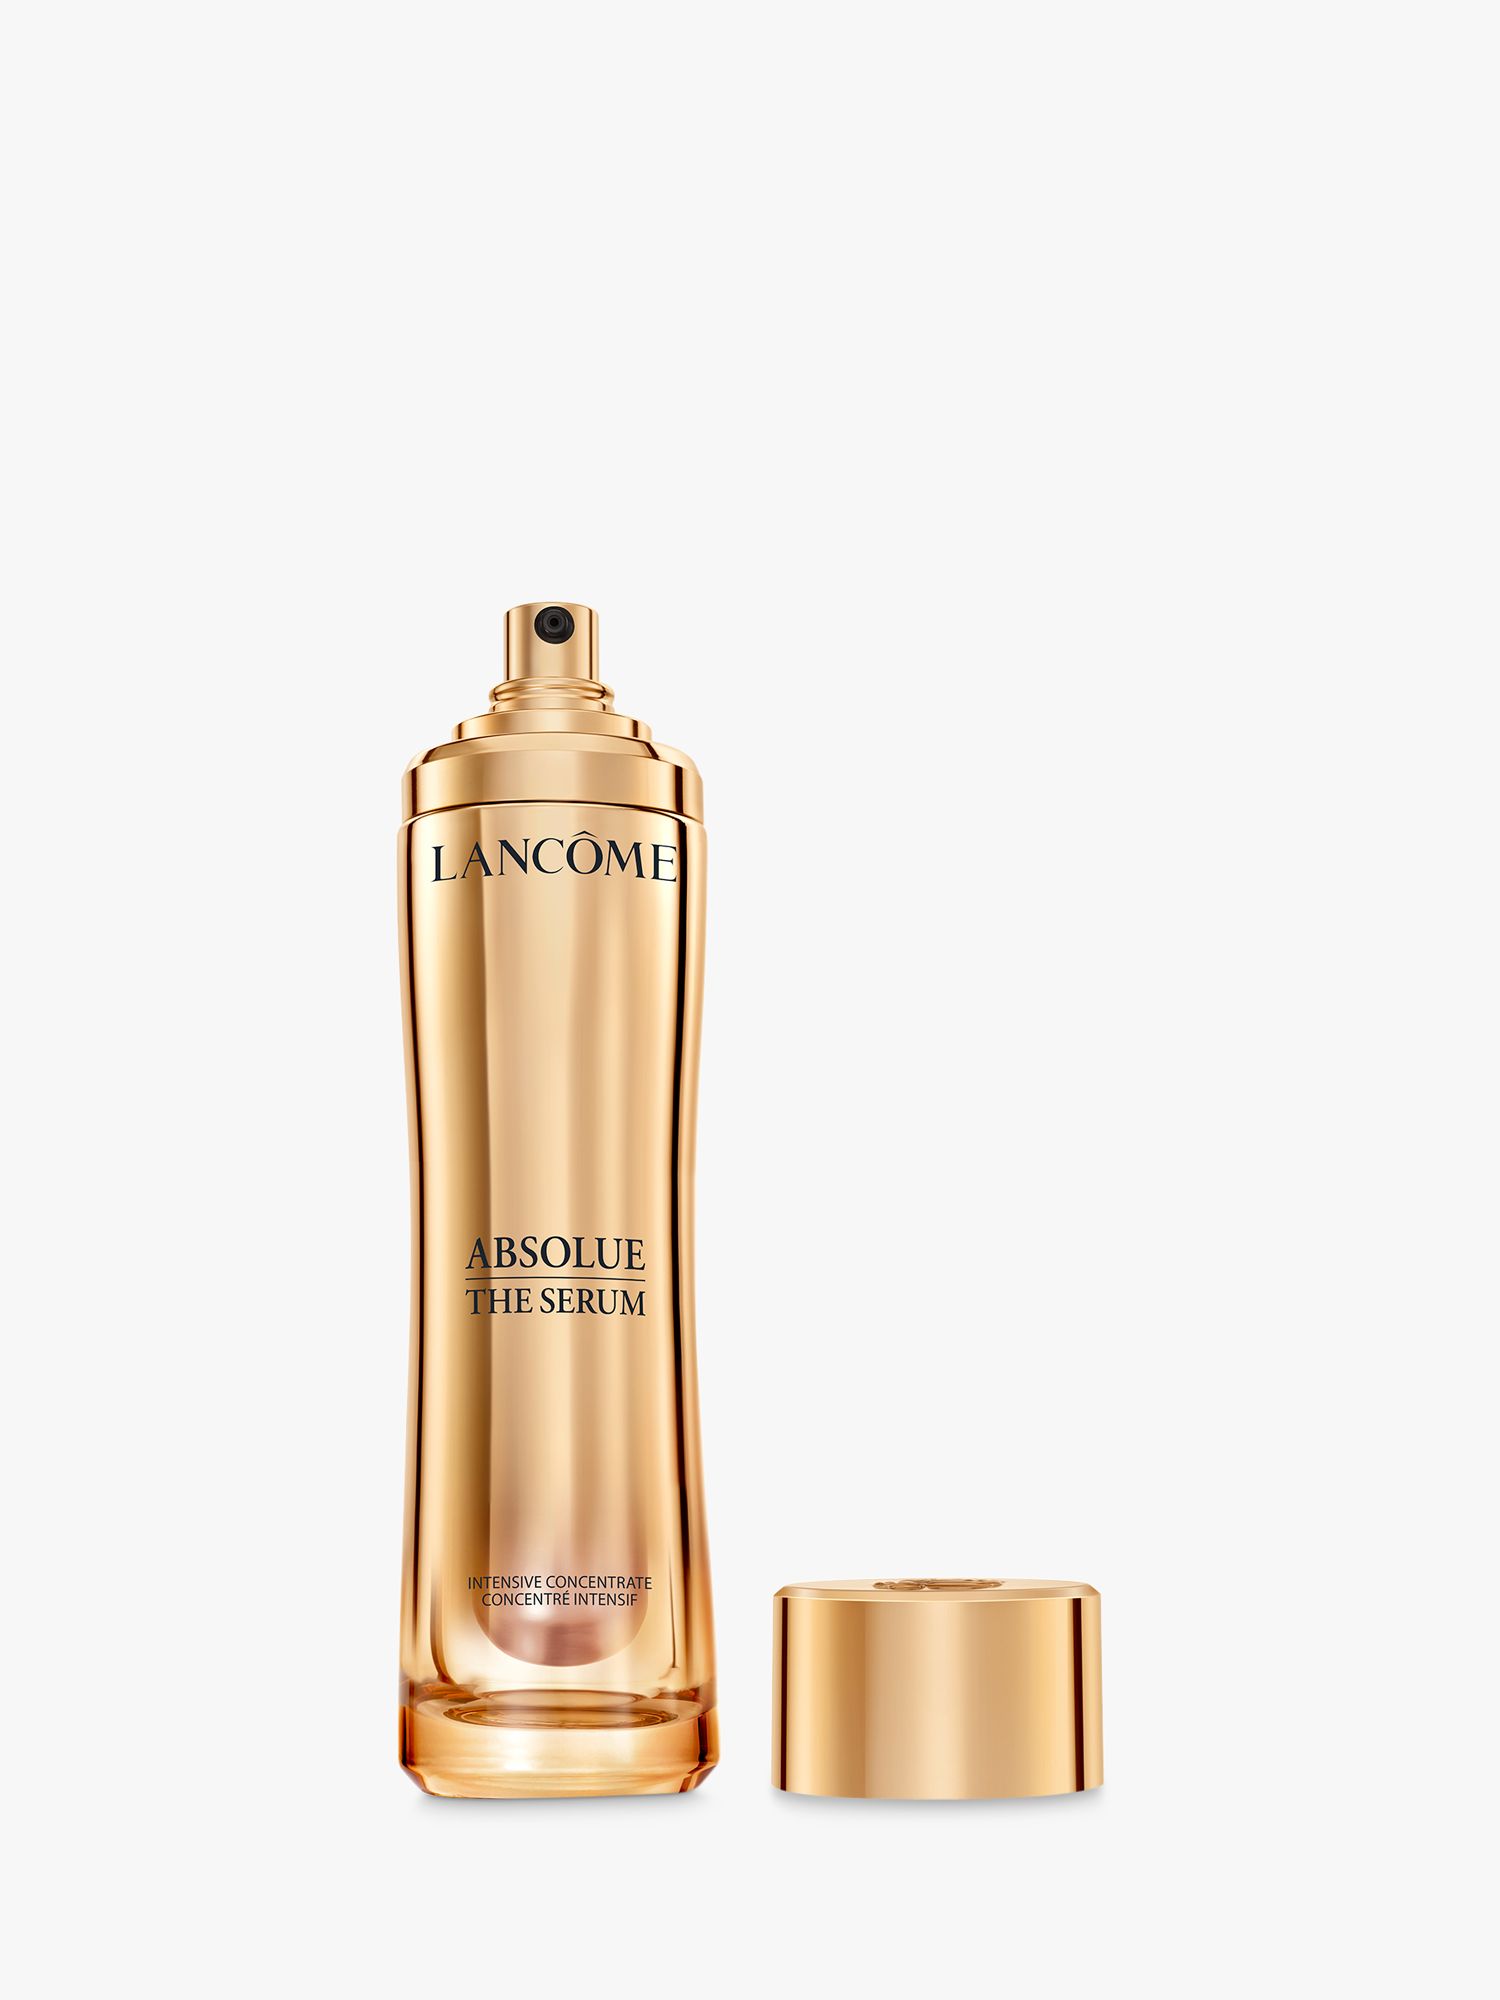 Lancôme Absolue The Serum Intensive Concentrate, 30ml 5